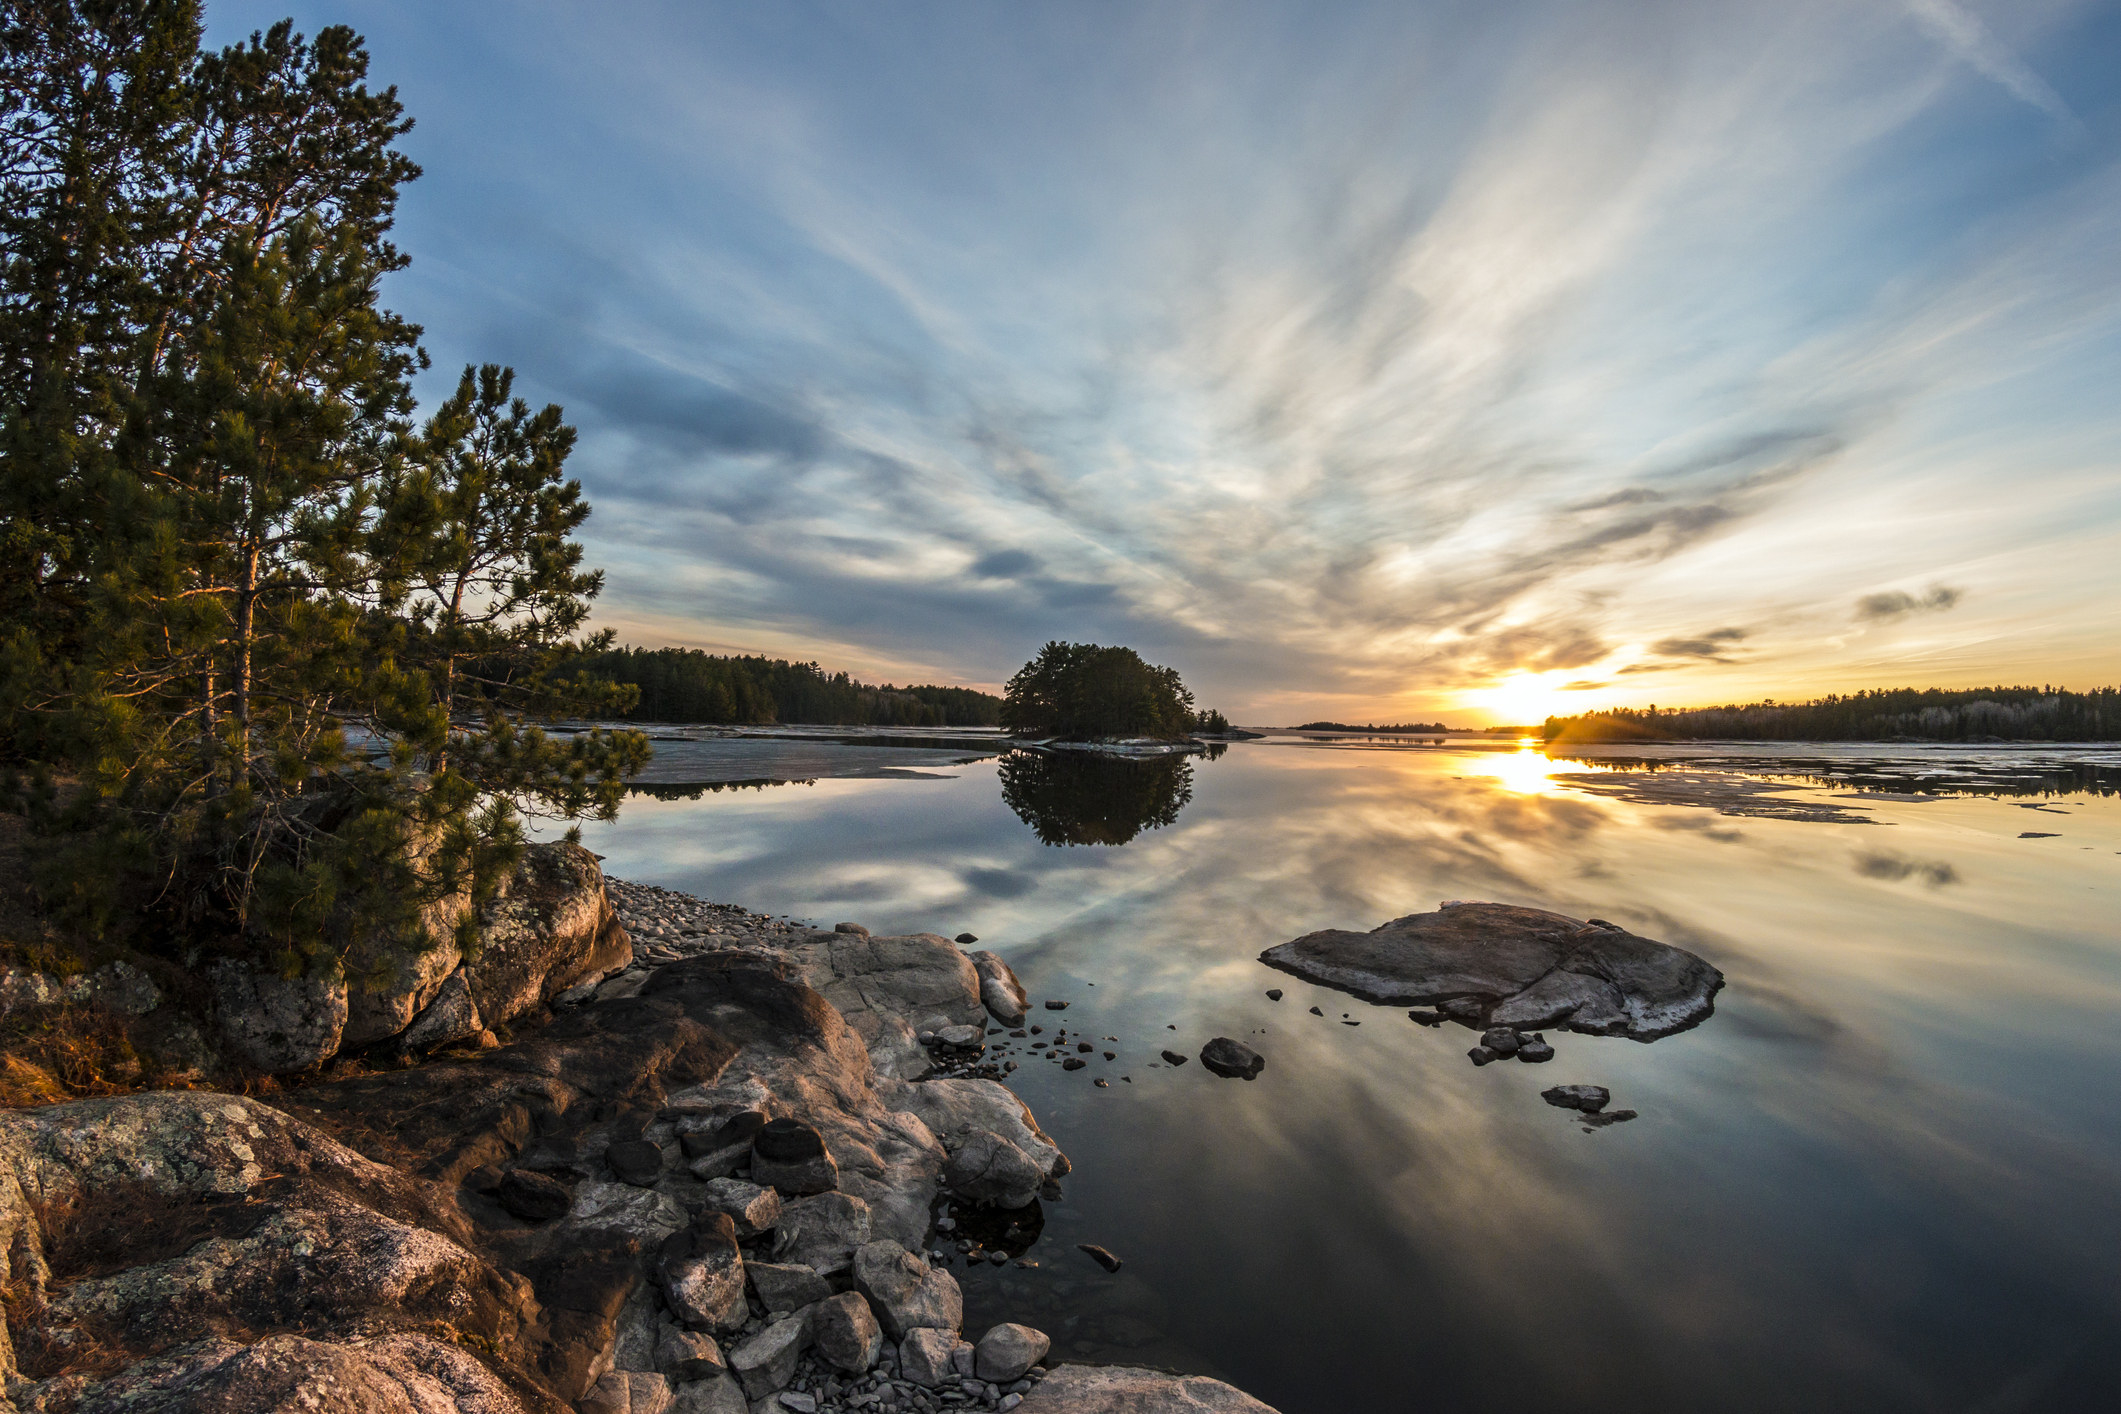 The sunset along the waters of Voyageurs National Park.